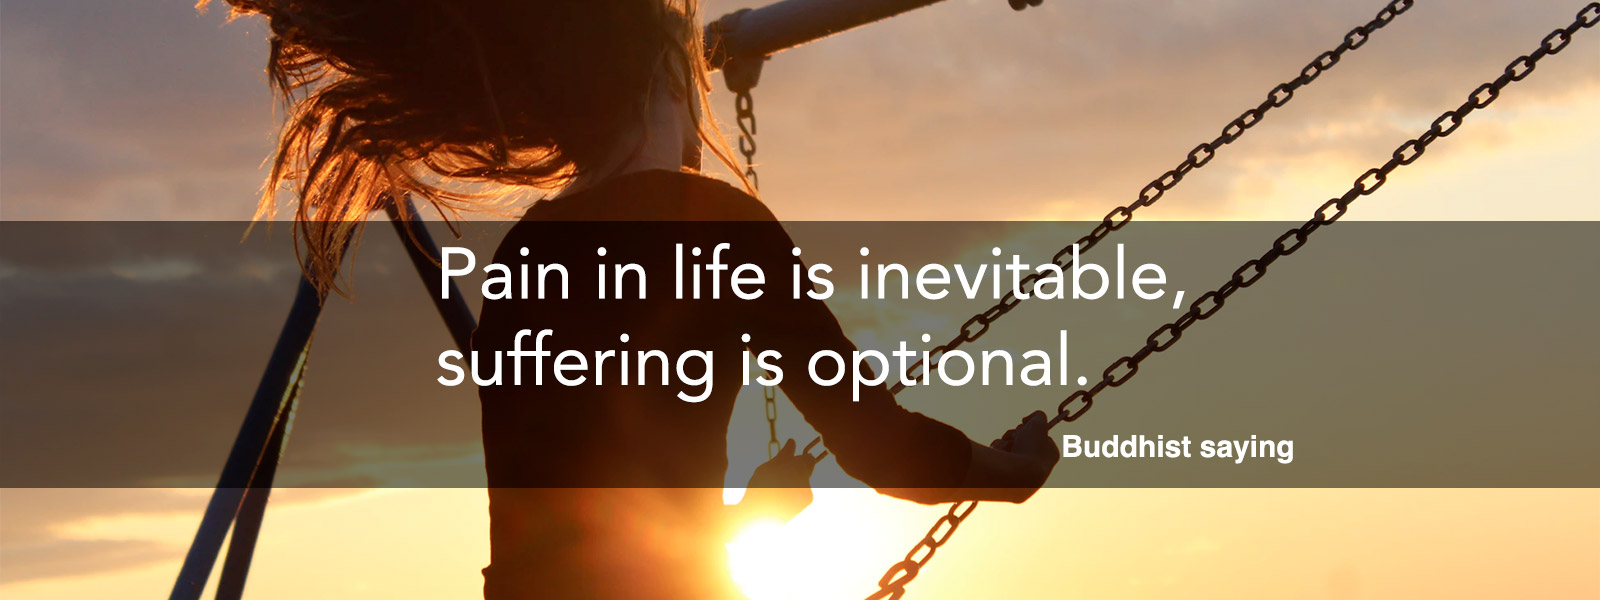 Pain in life is inevitable, suffering is optional.